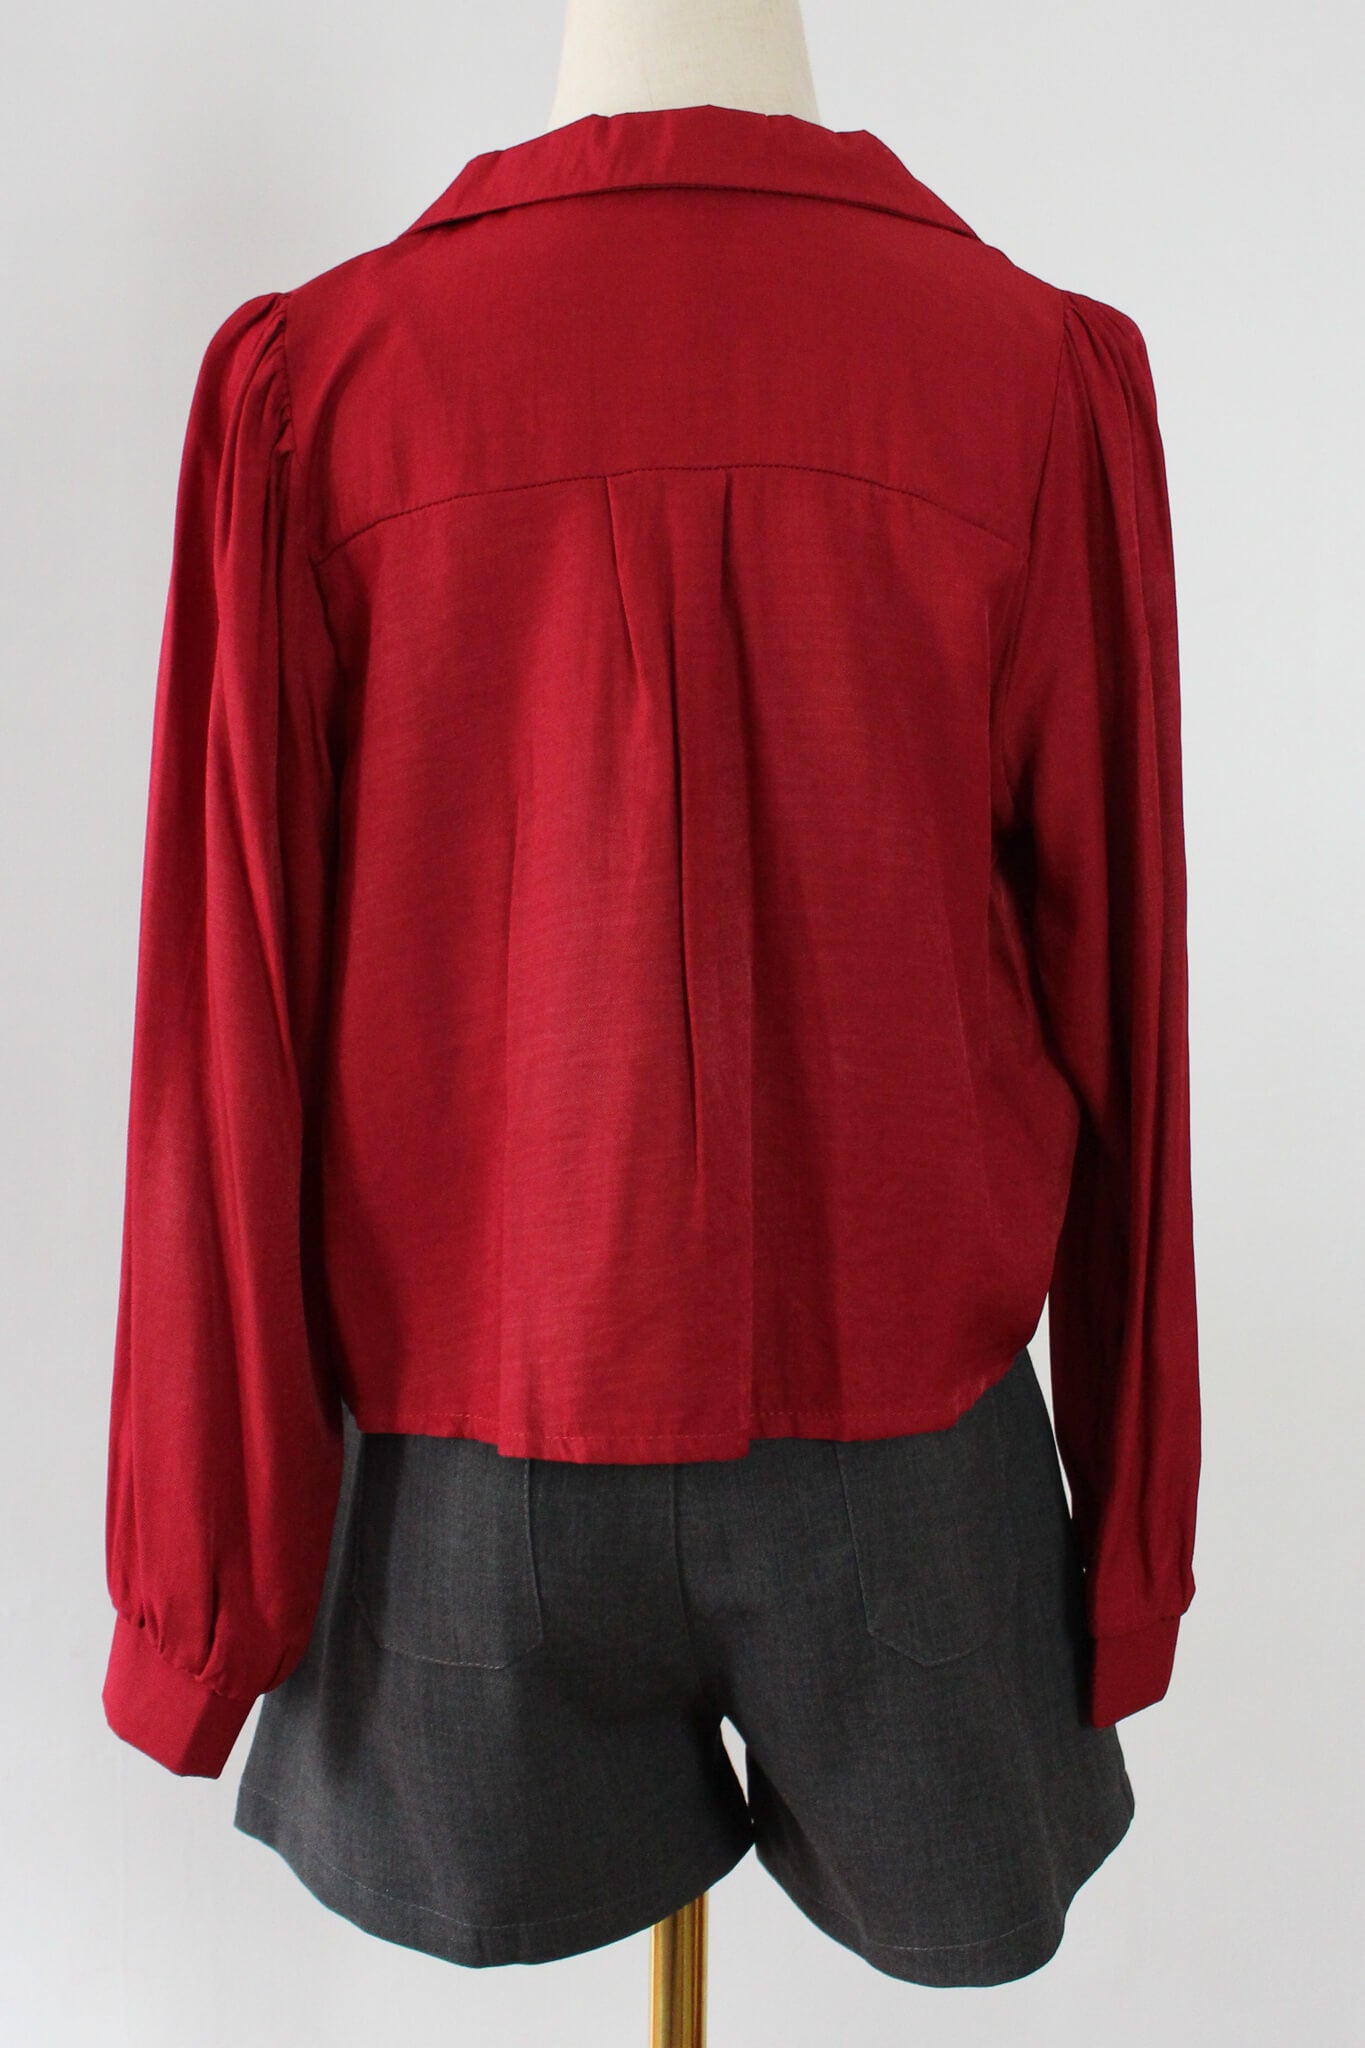 Cropped shirt that can be worn as outerwear. Thin and lightweight